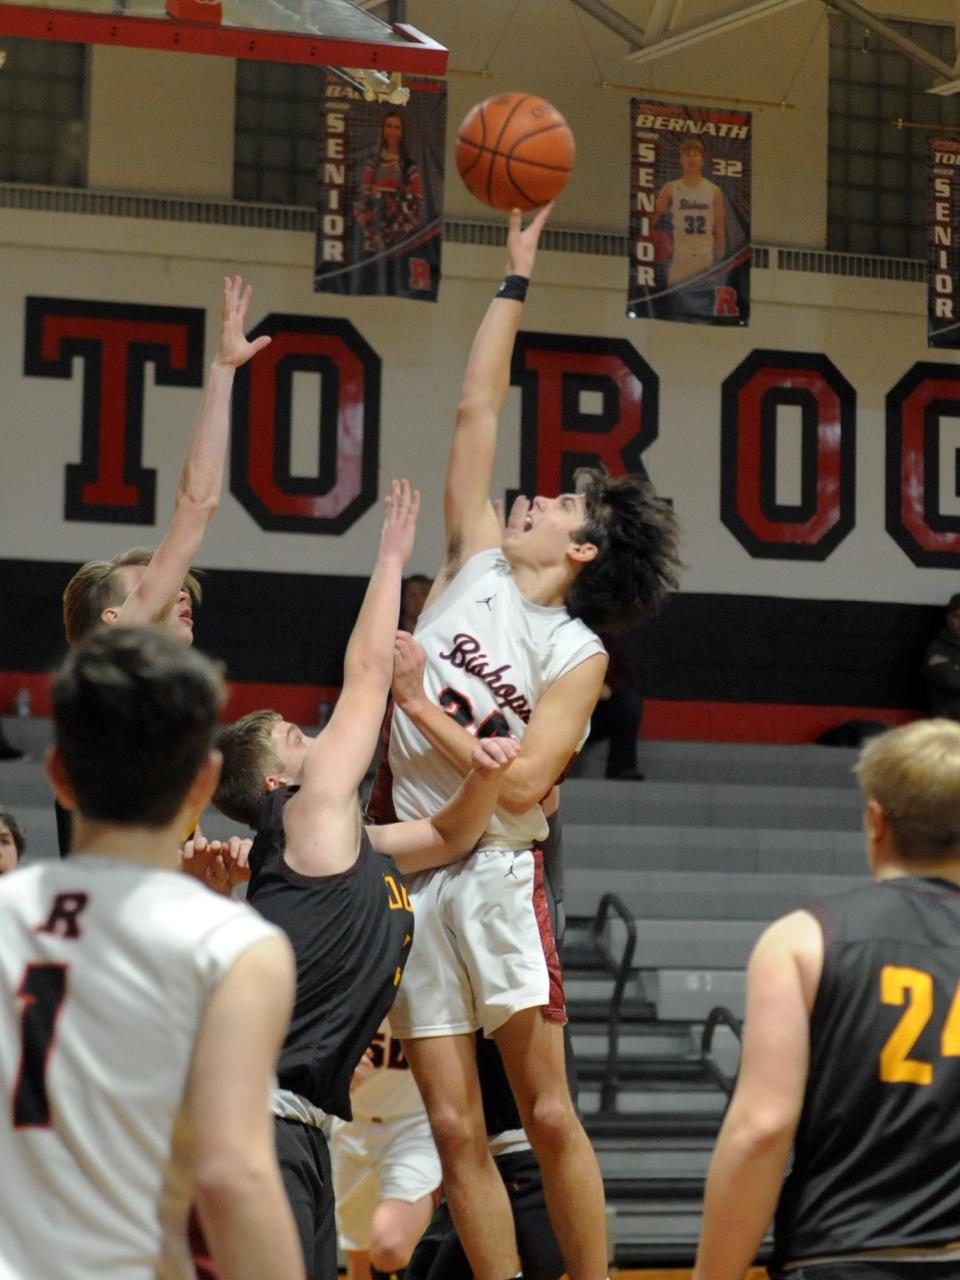 Weston Hartman shoots a floater during Rosecrans' win against visiting Berne Union last season. Hartman and Grady Labishak will lead the charge for the Bishops.